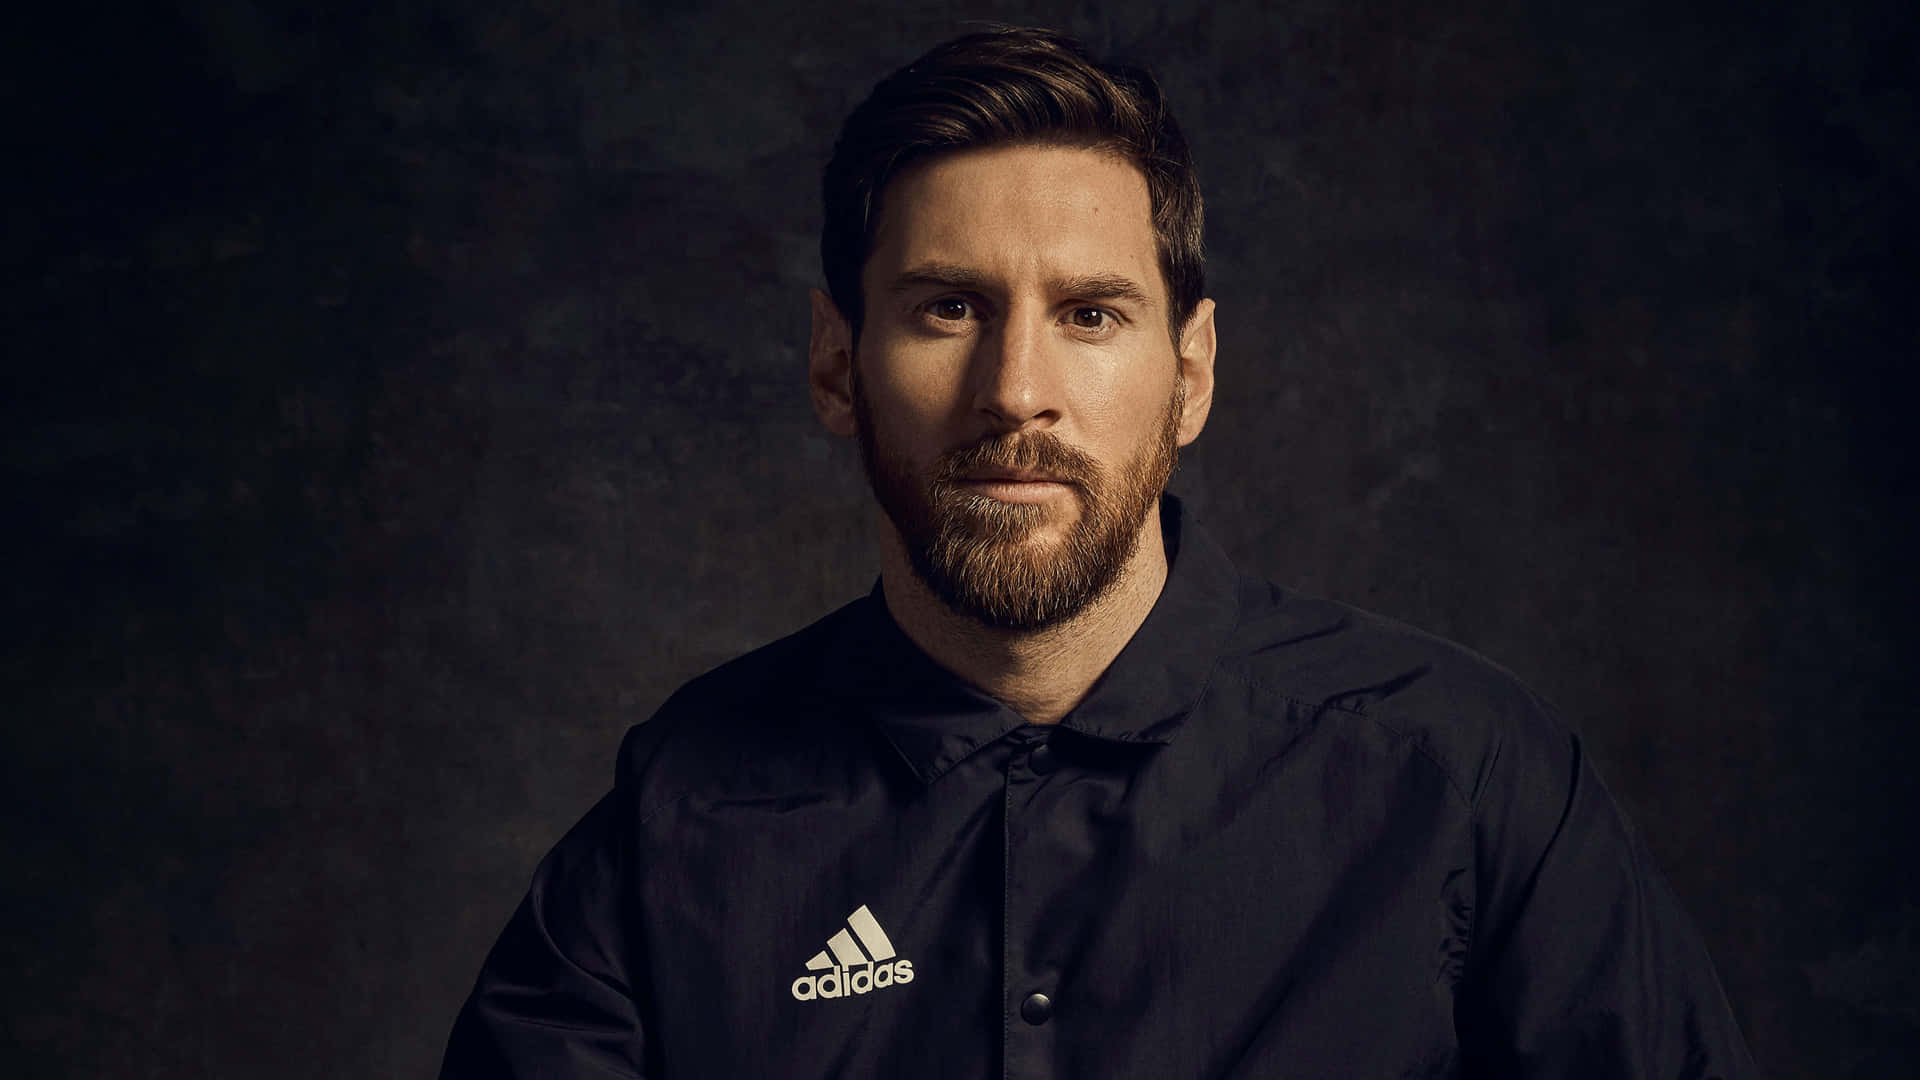 The one and only Lionel Messi